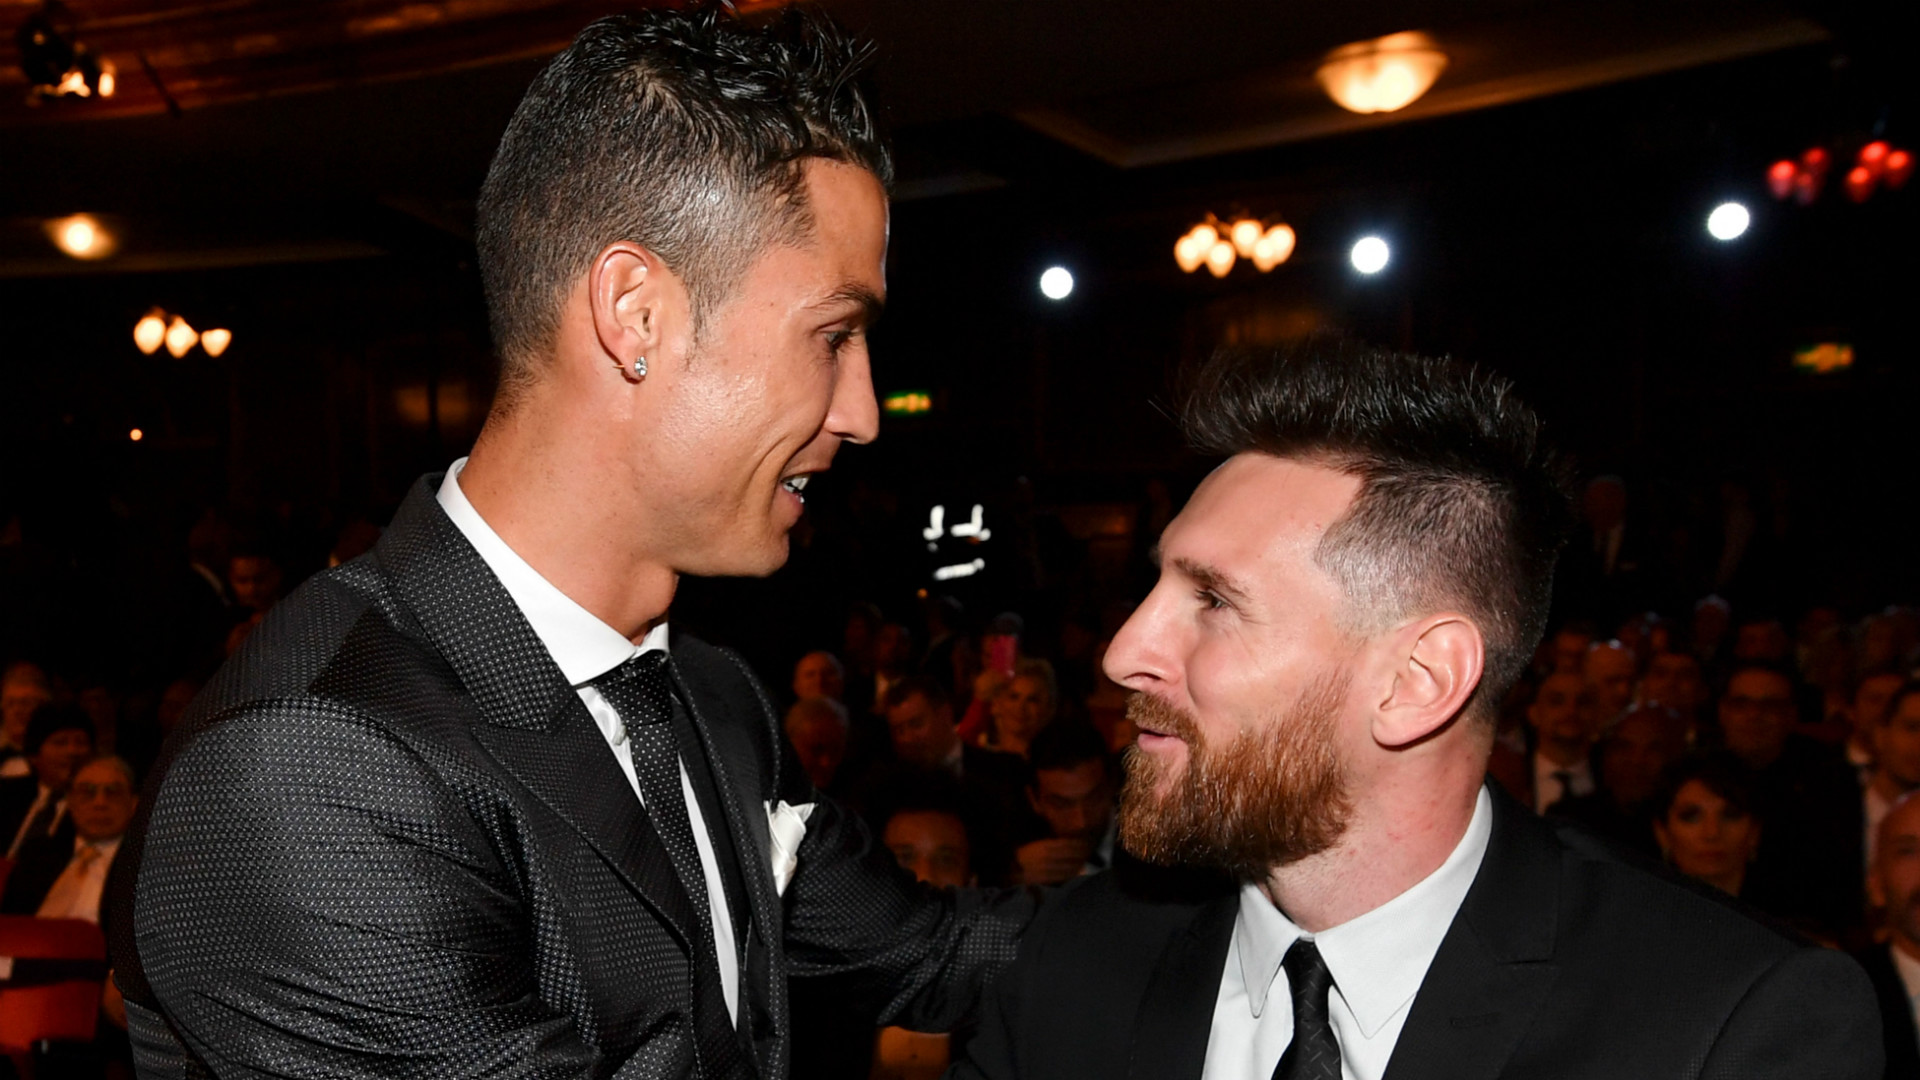 Who came first in football: Lionel Messi or Cristiano Ronaldo? | Goal.com